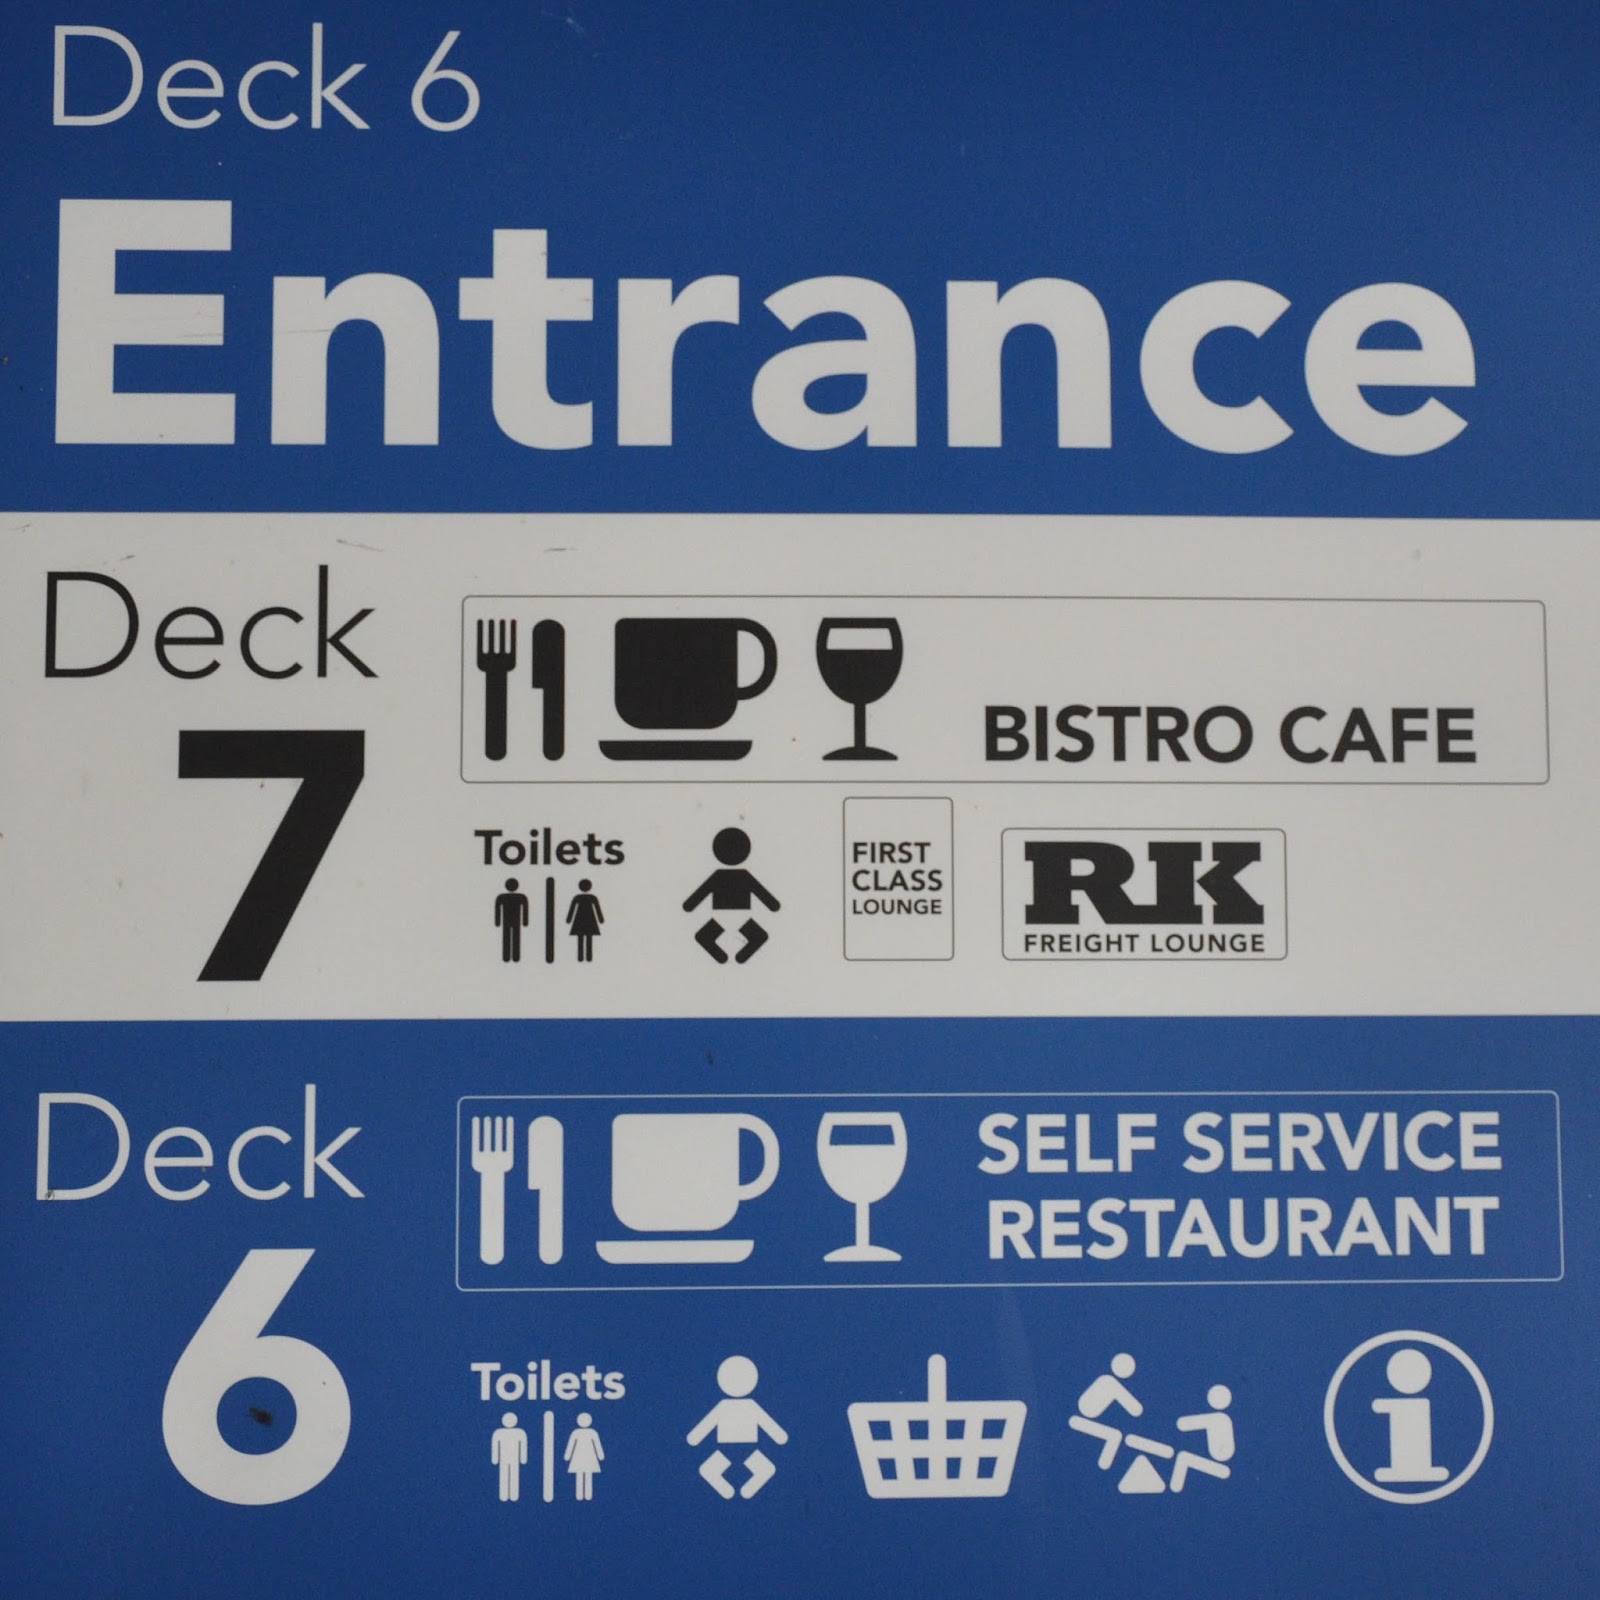 A sign on the DFDS Saeways Ferry, The English Channel, on the way back from France